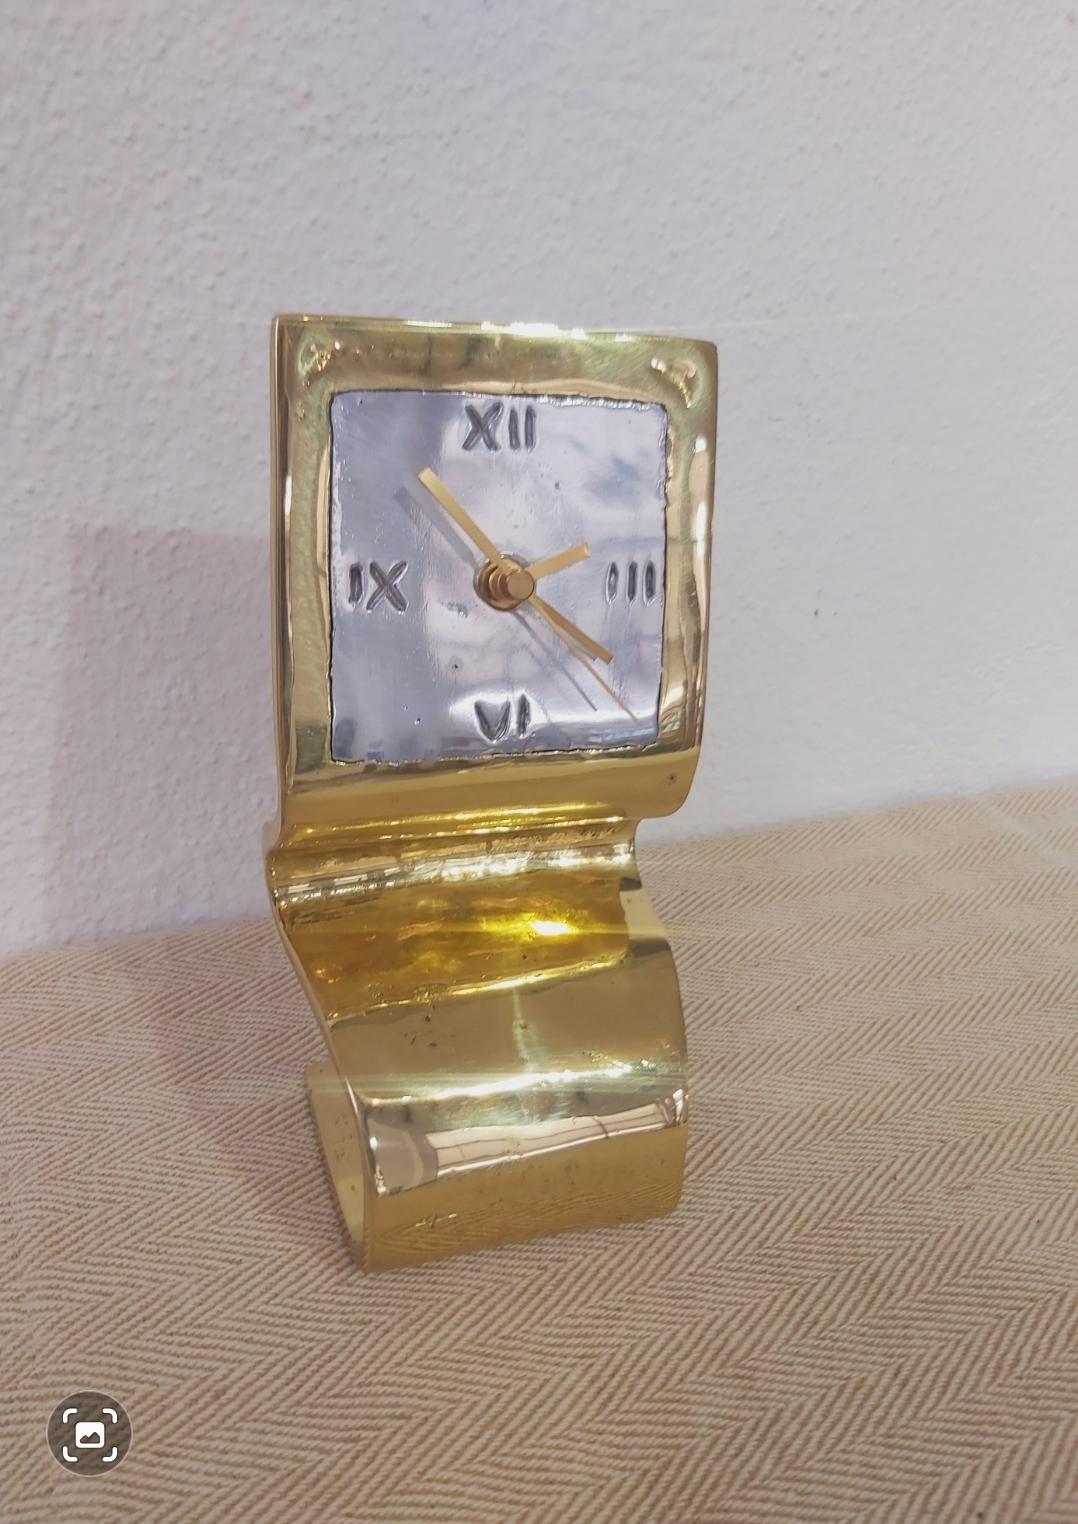 The clock was created by David Marshall, from sand cast aluminium and brass.
 We use recycled materials all our pieces are handmade, mounted and finished in our foundry and workshop in Spain.
It is certified authentic by the Artist David